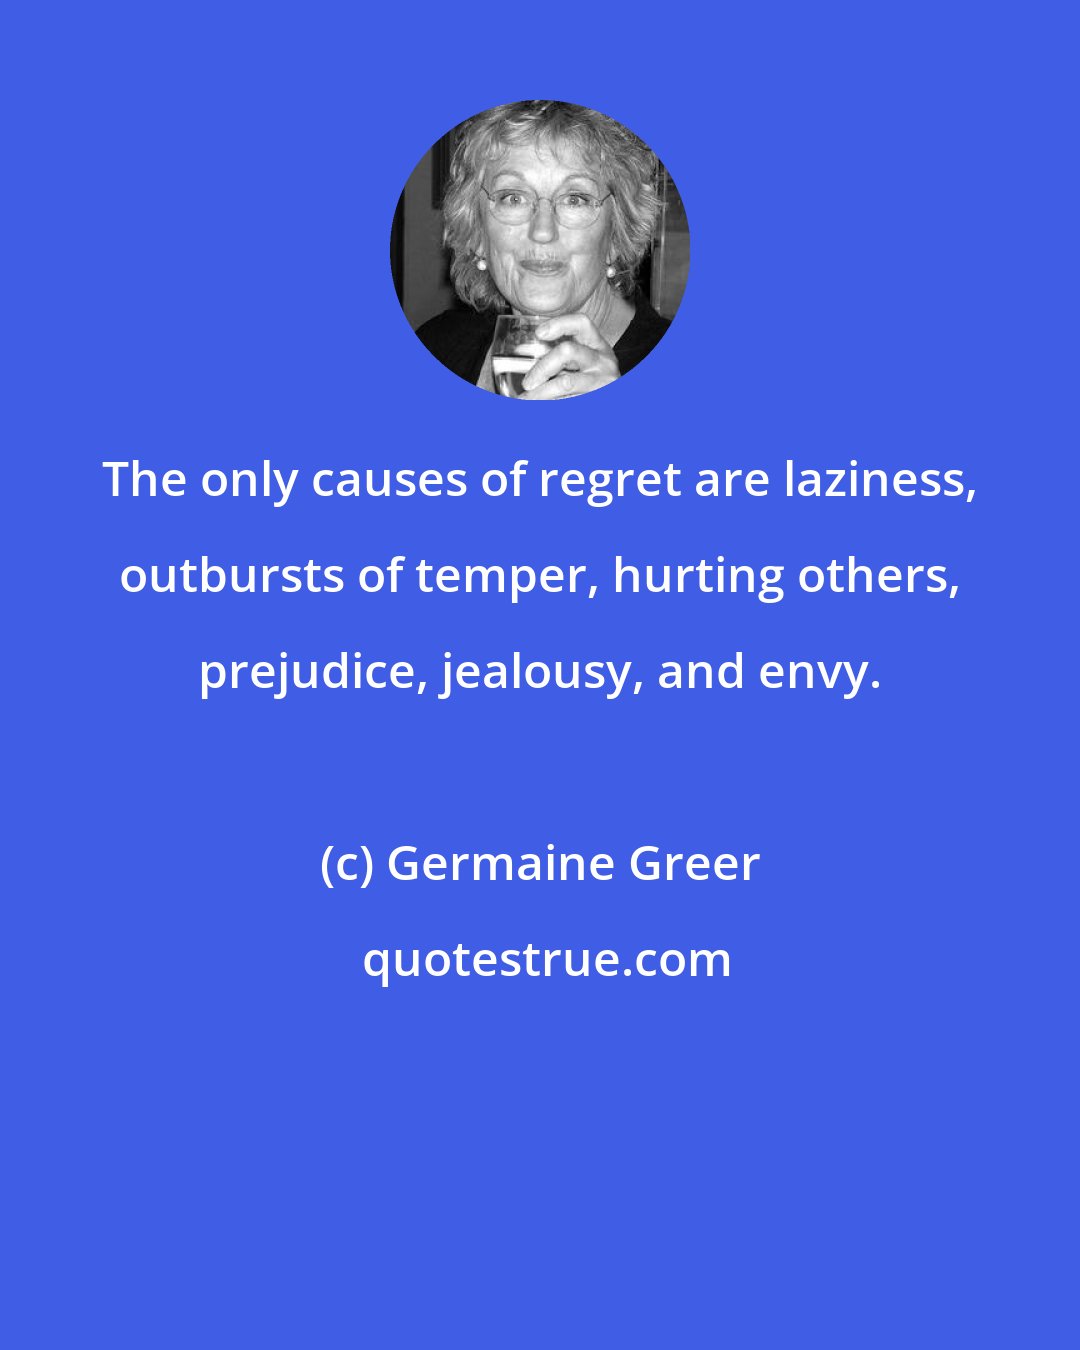 Germaine Greer: The only causes of regret are laziness, outbursts of temper, hurting others, prejudice, jealousy, and envy.